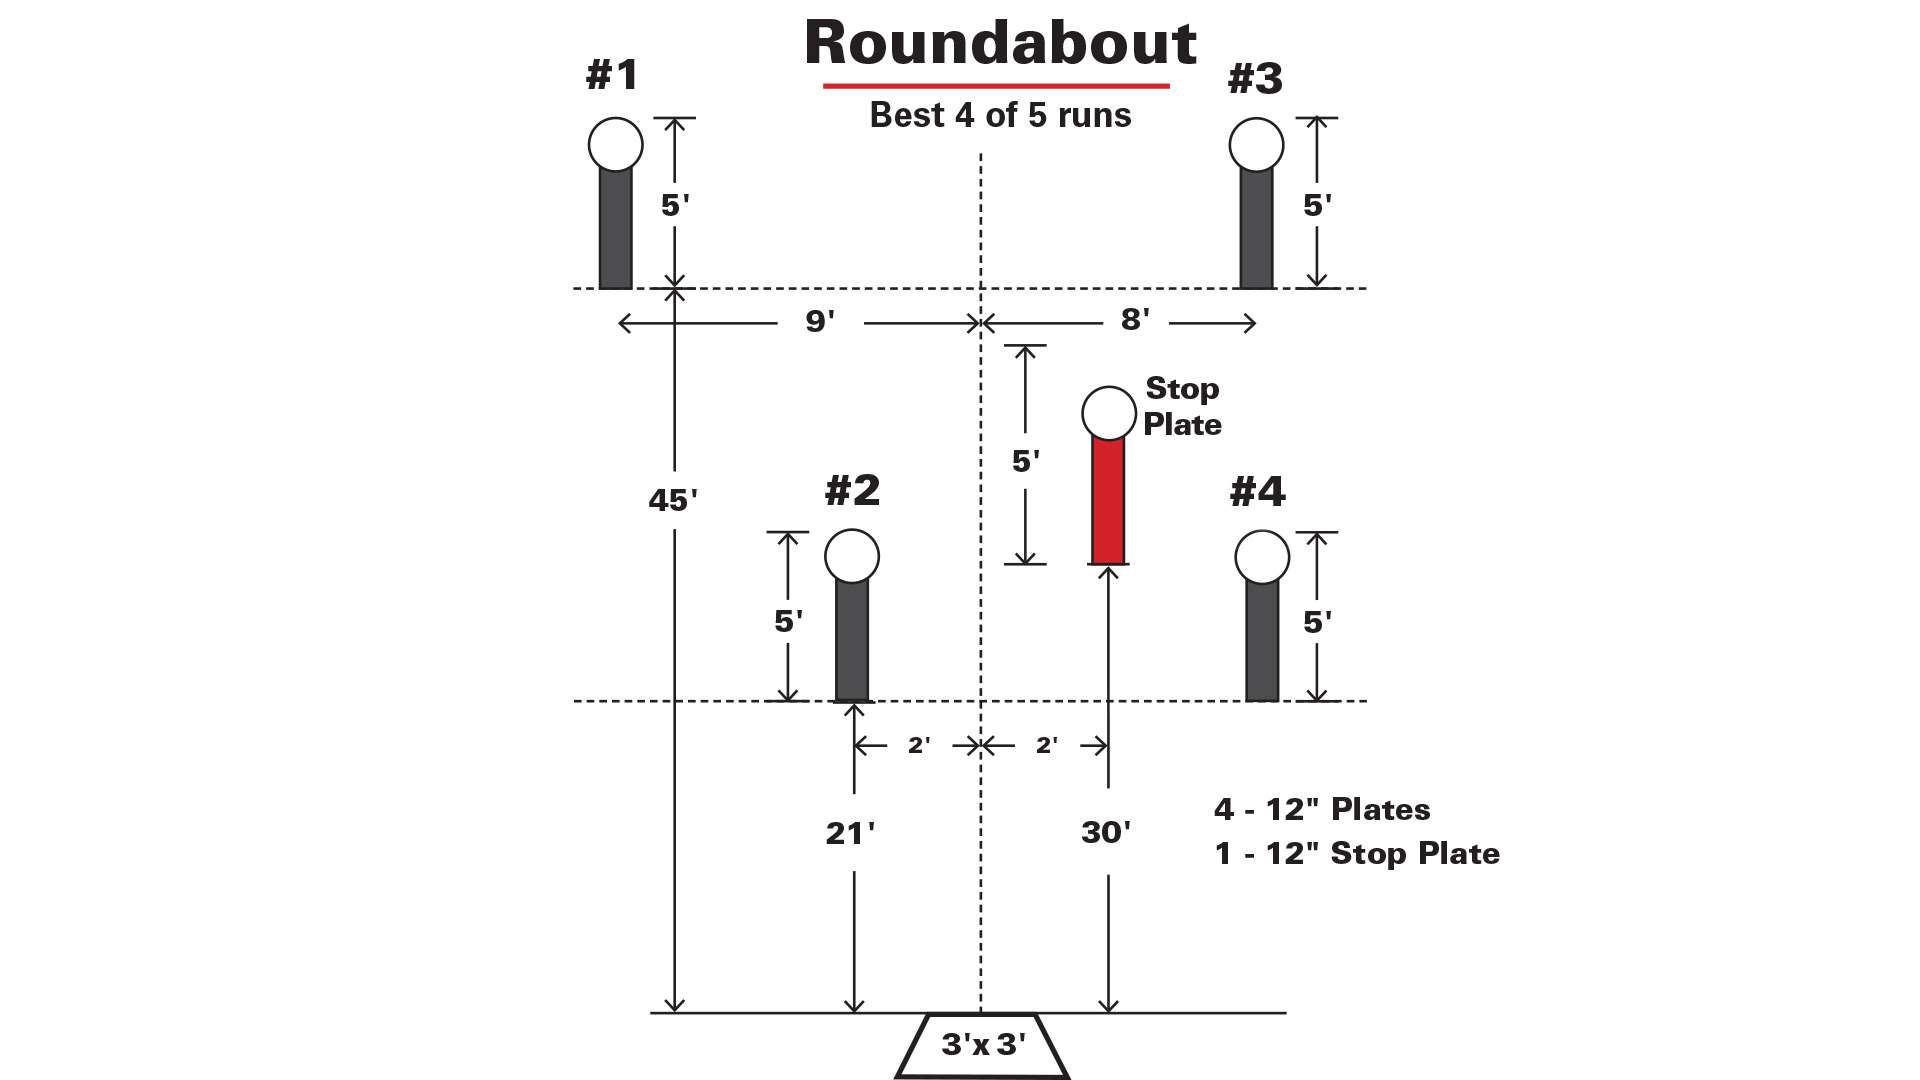 Roundabout stage diagram